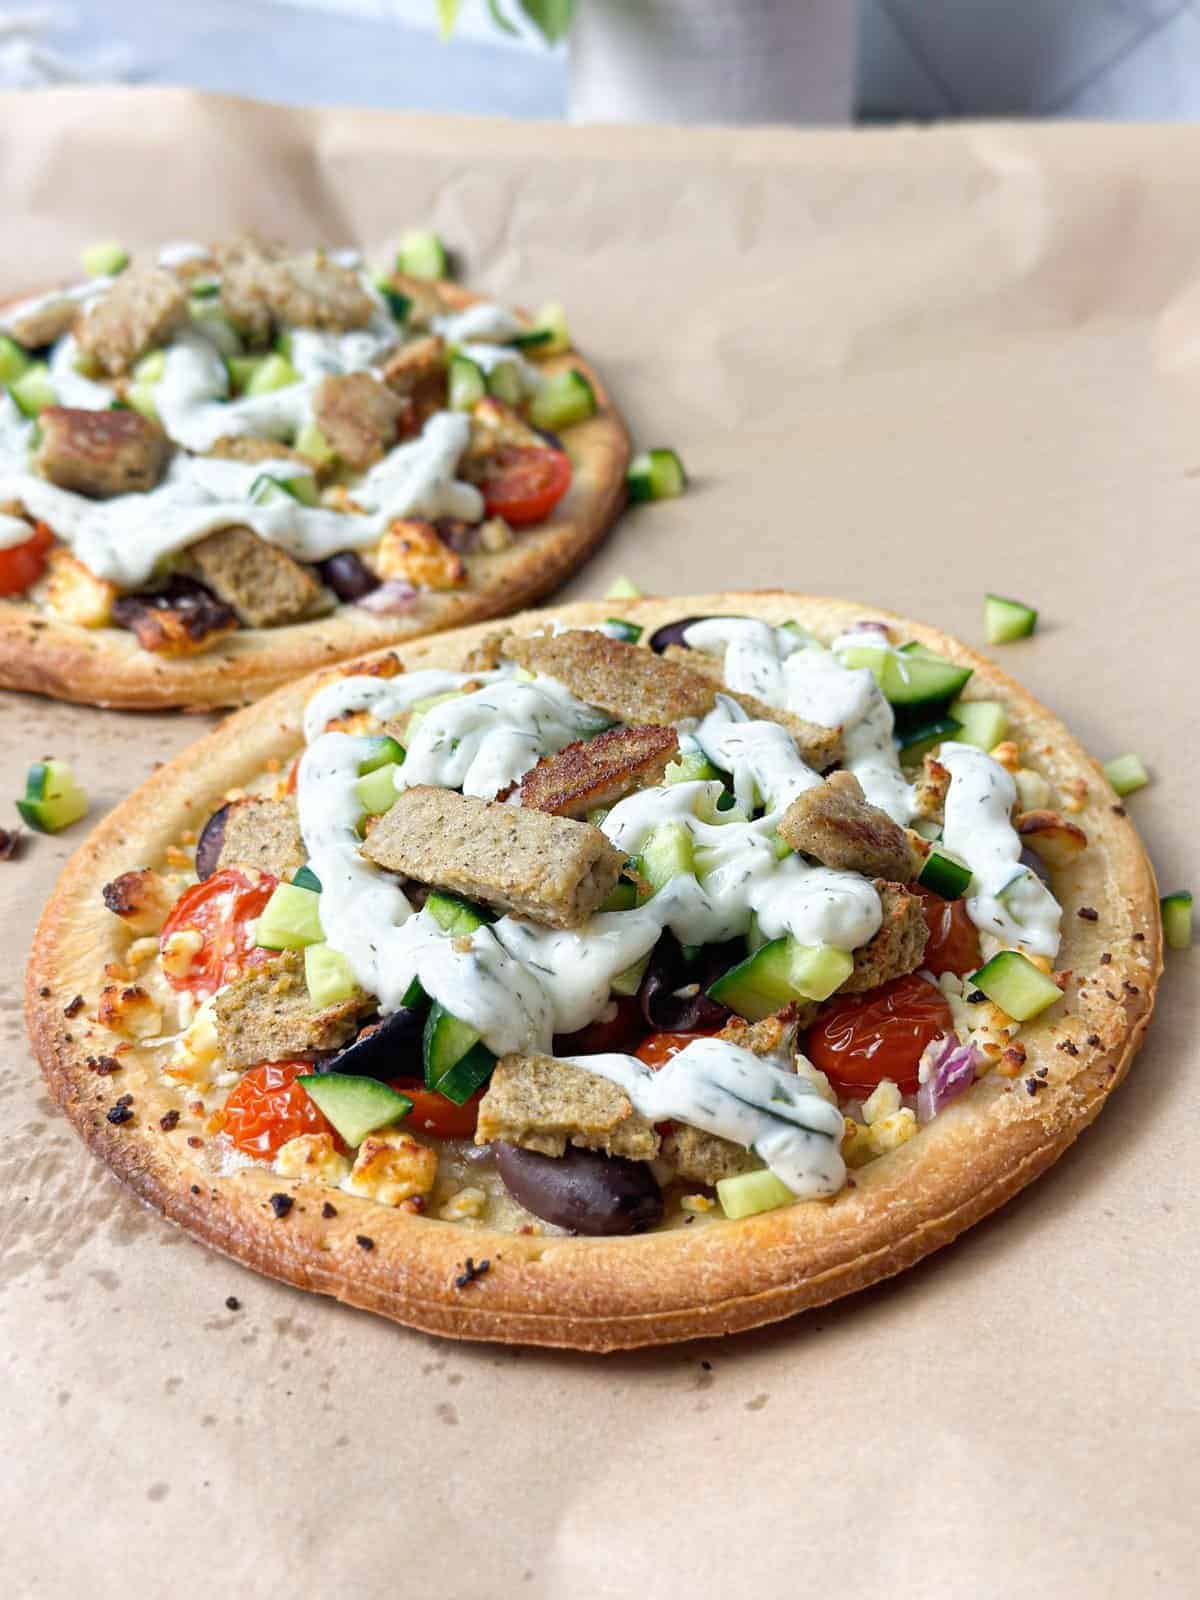 amazing baked flat bread filled to bursting with cucumber, cherry tomatoes, feta cheese, gyro meat, and tzatziki sauce